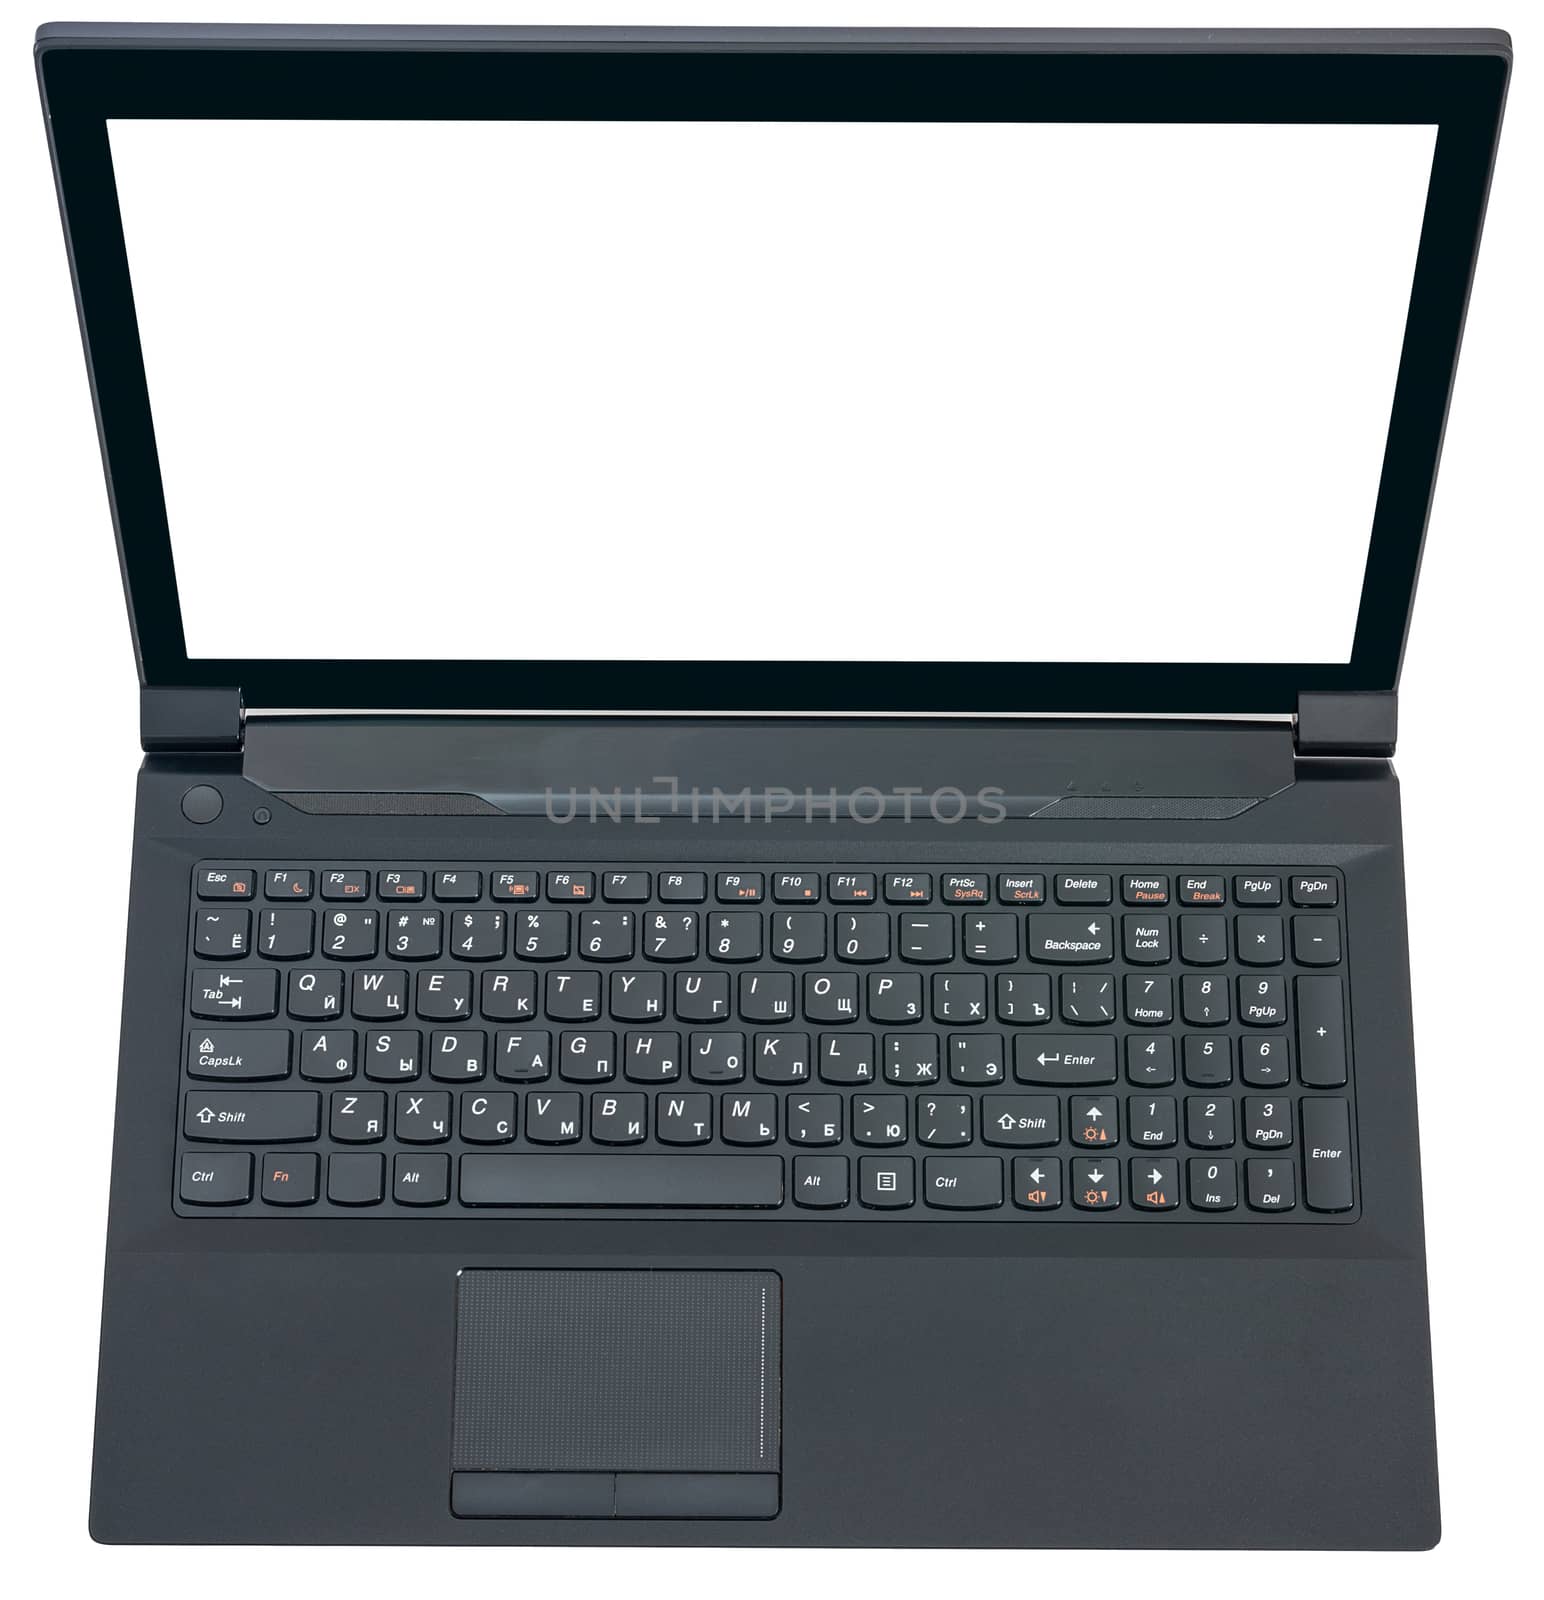 Open black laptop with blank screen isolated on white background, top view